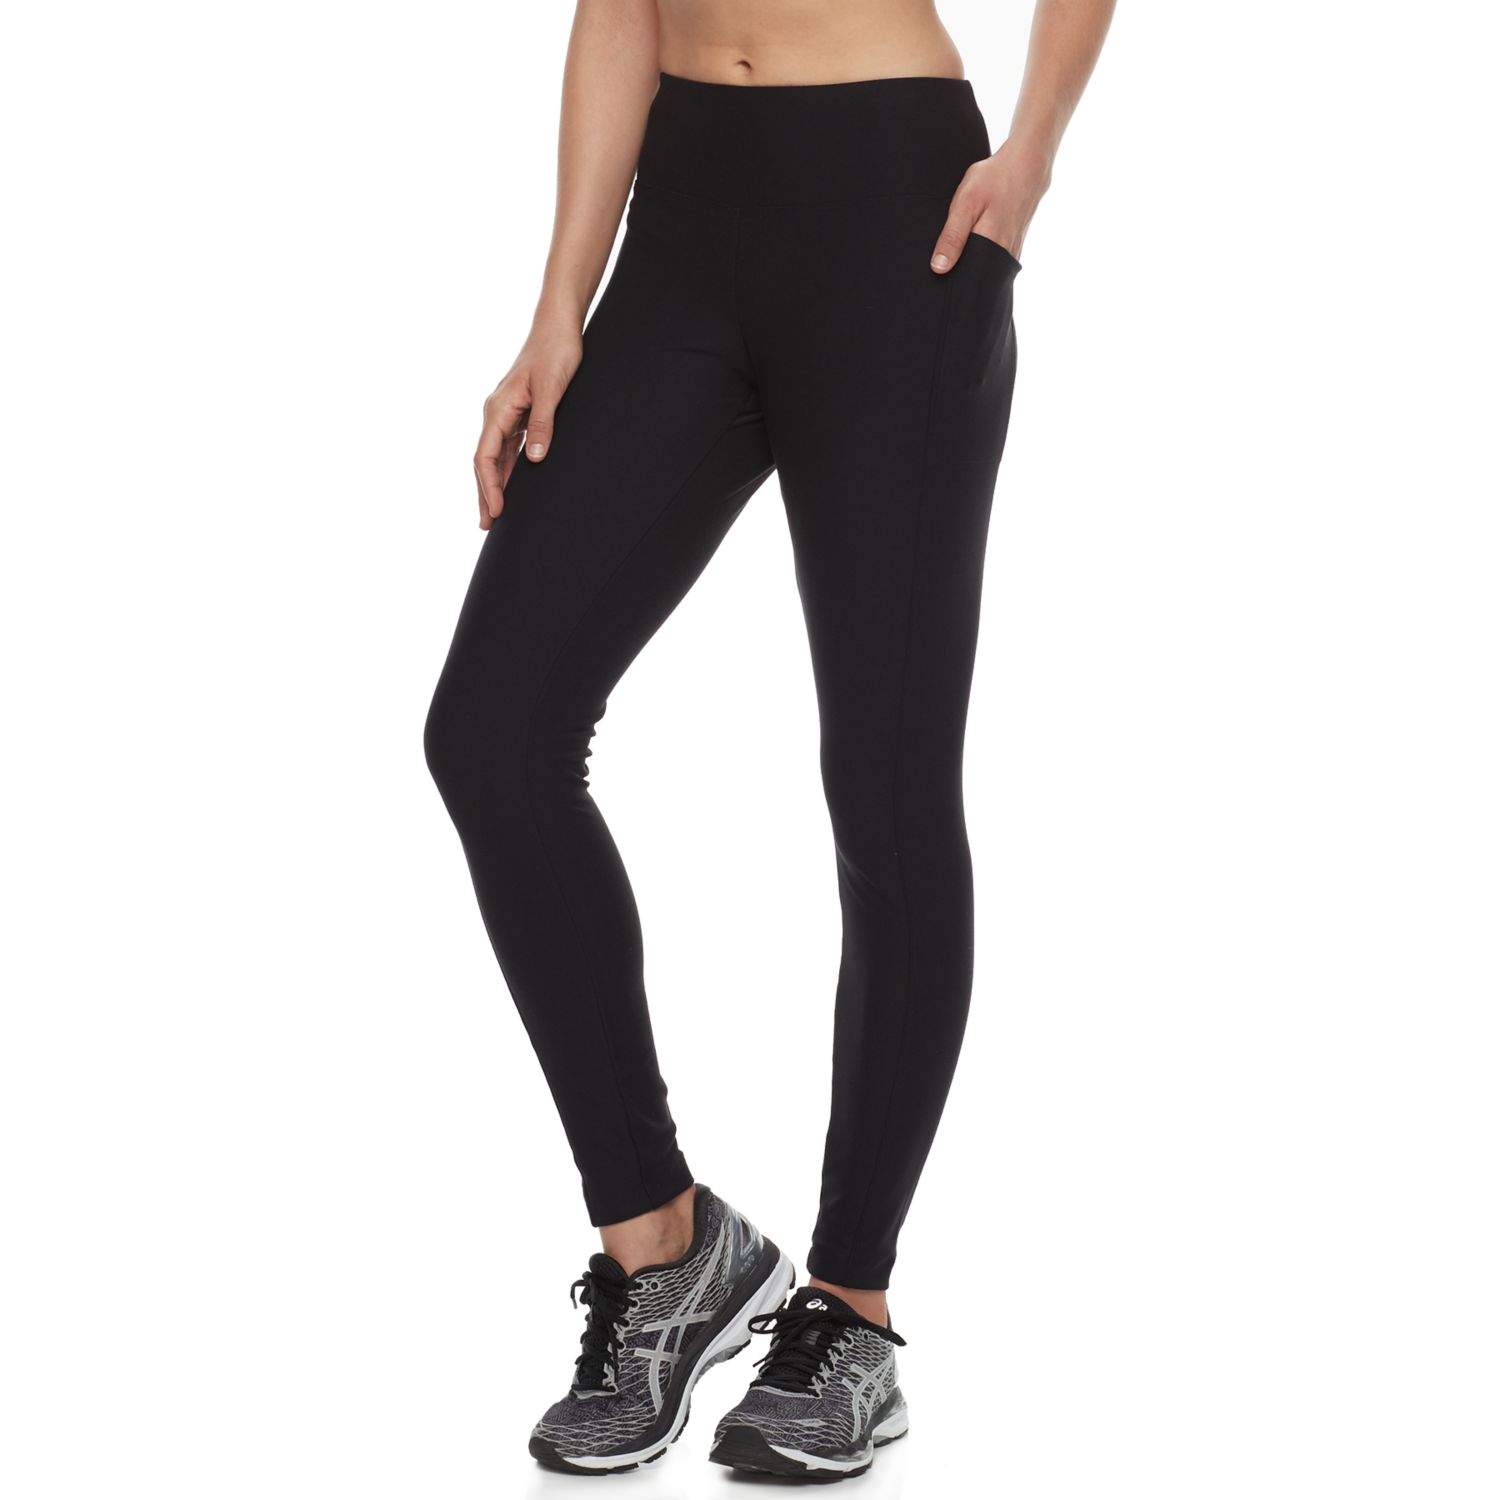 women's workout pants with side pockets